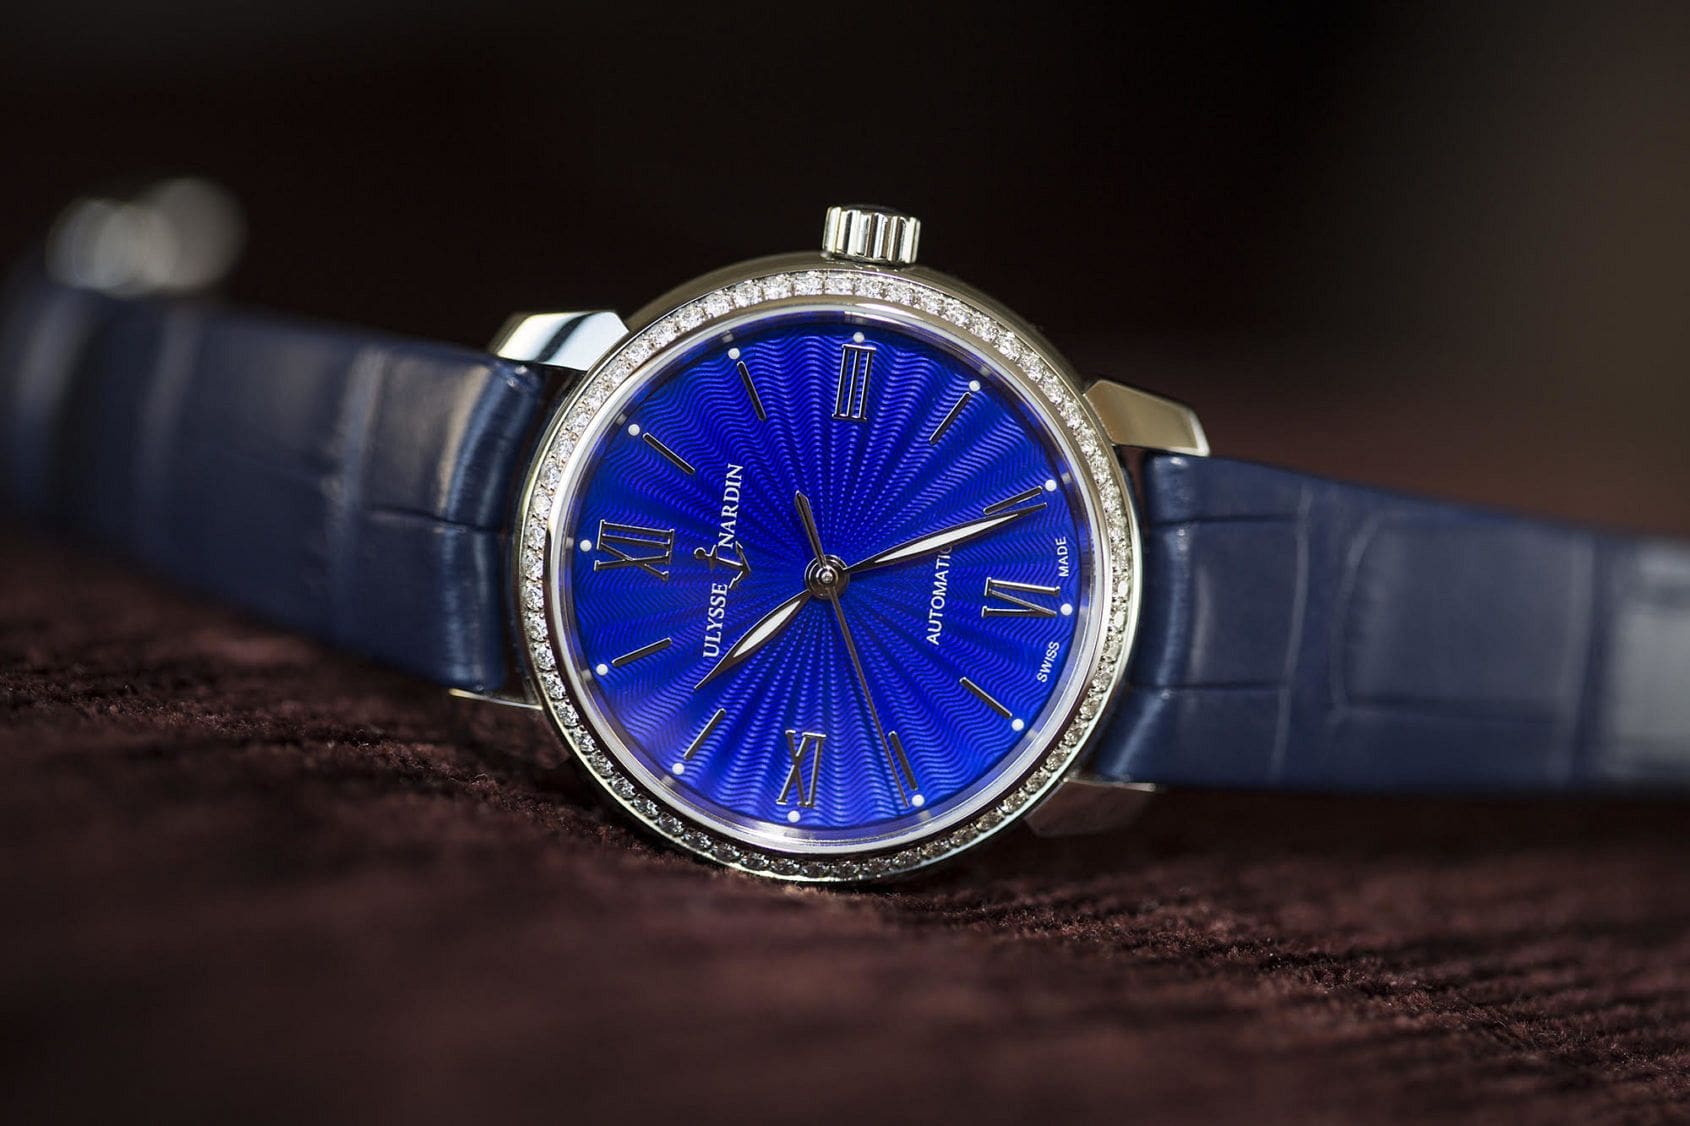 HANDS-ON: Singing the blues with the ladies’ Ulysse Nardin Classico